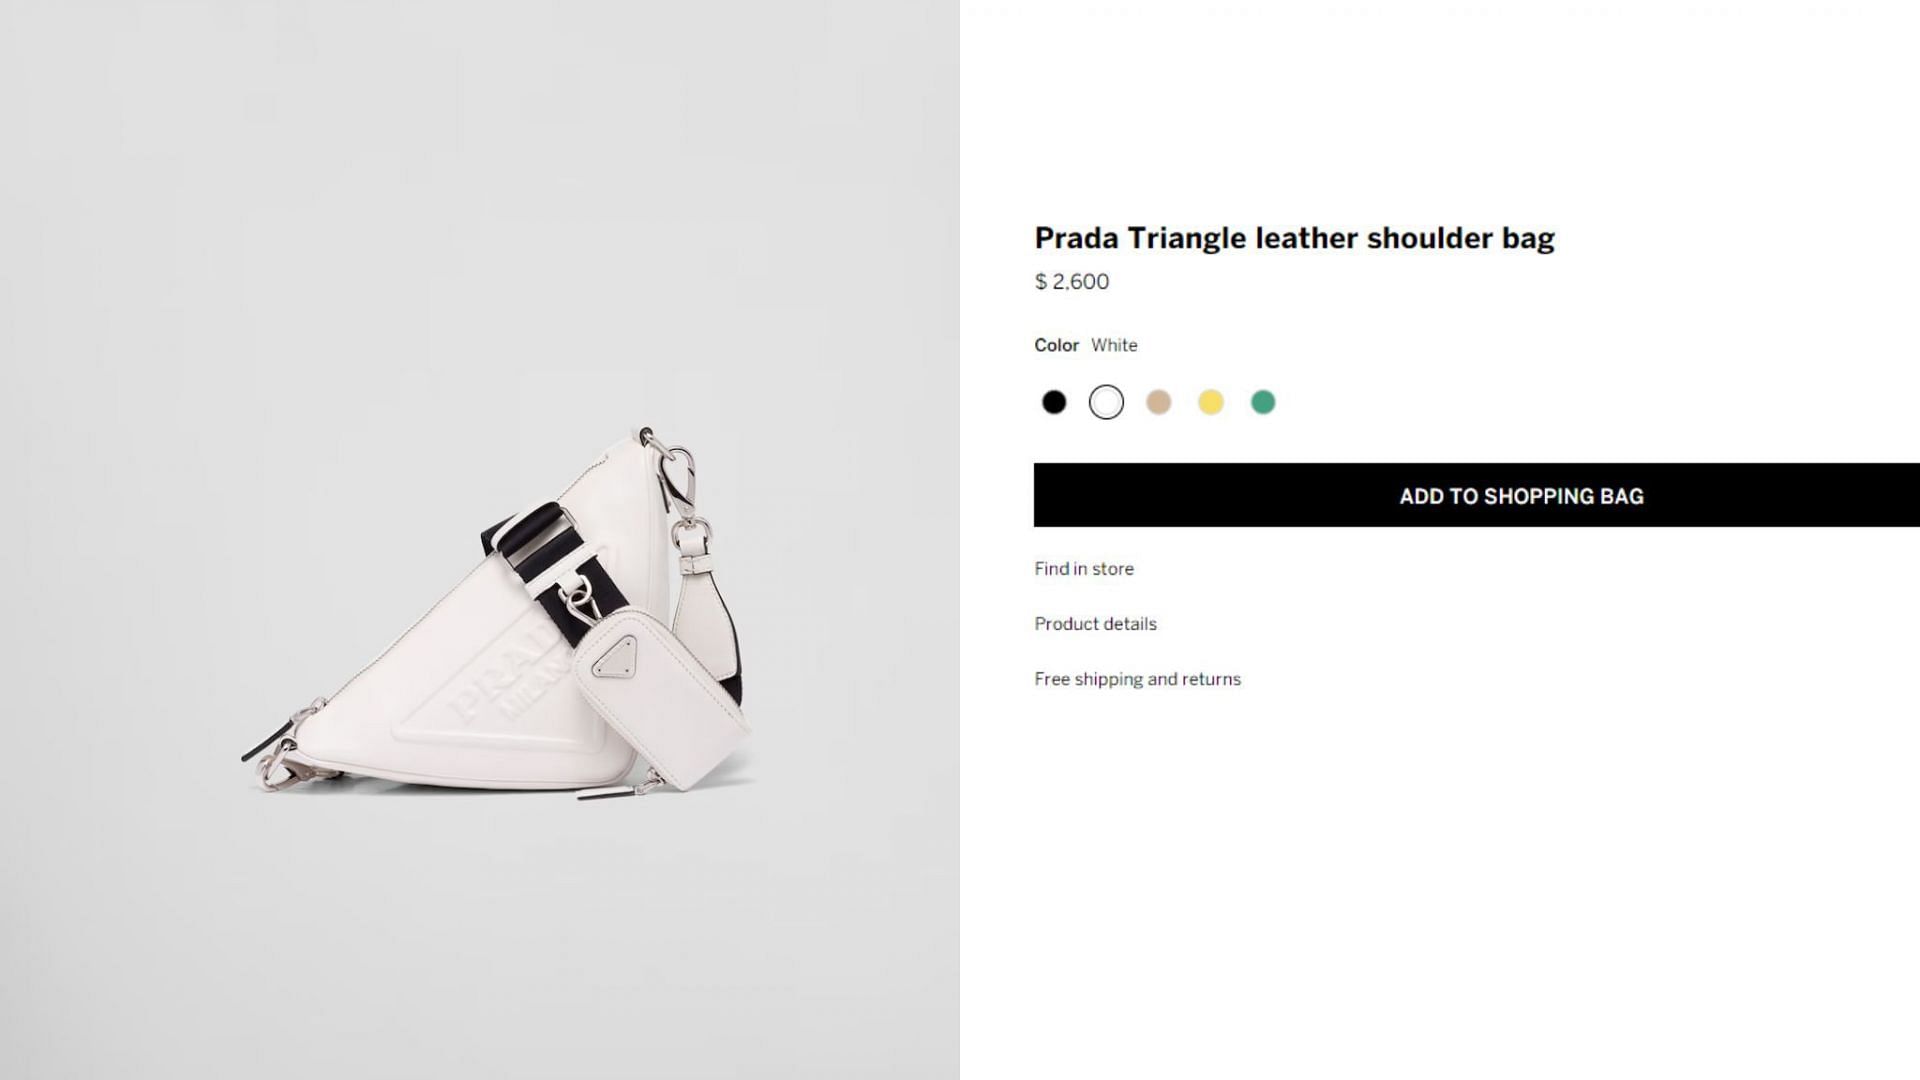 The Prada Triangle leather shoulder bag is listed at $2600 on the Prada website